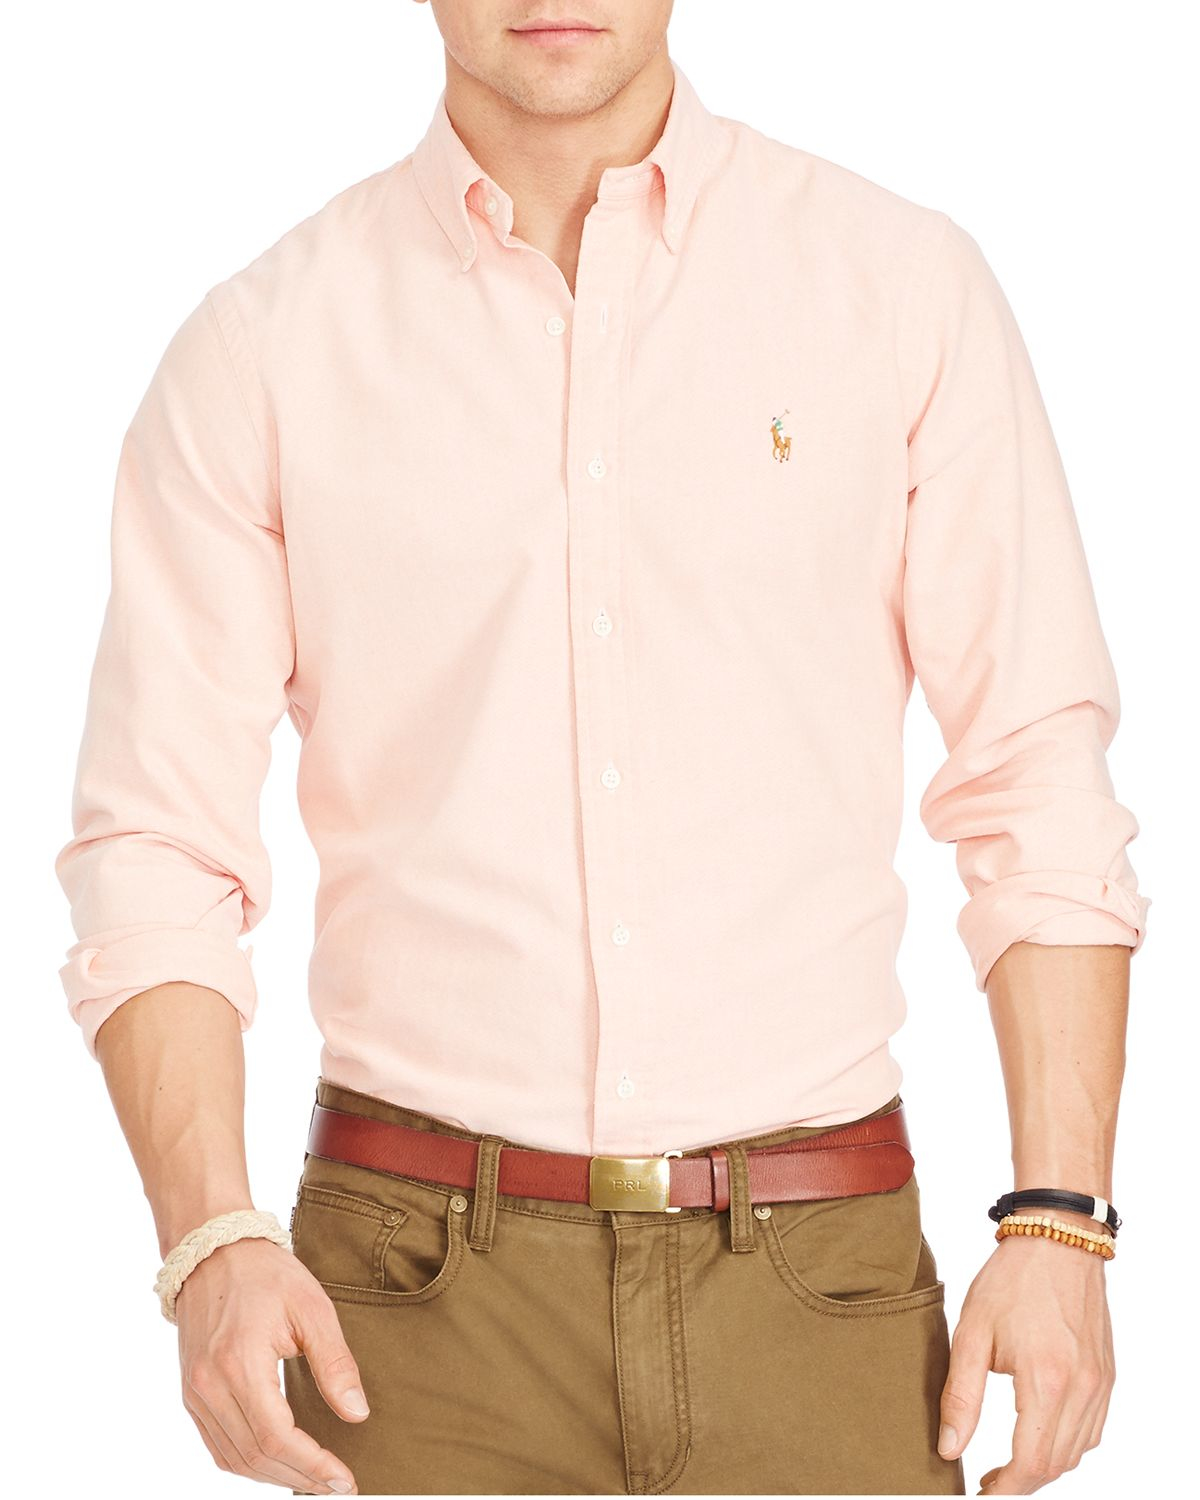 Lyst - Polo Ralph Lauren Oxford Classic Fit Button Down Shirt in Orange ...